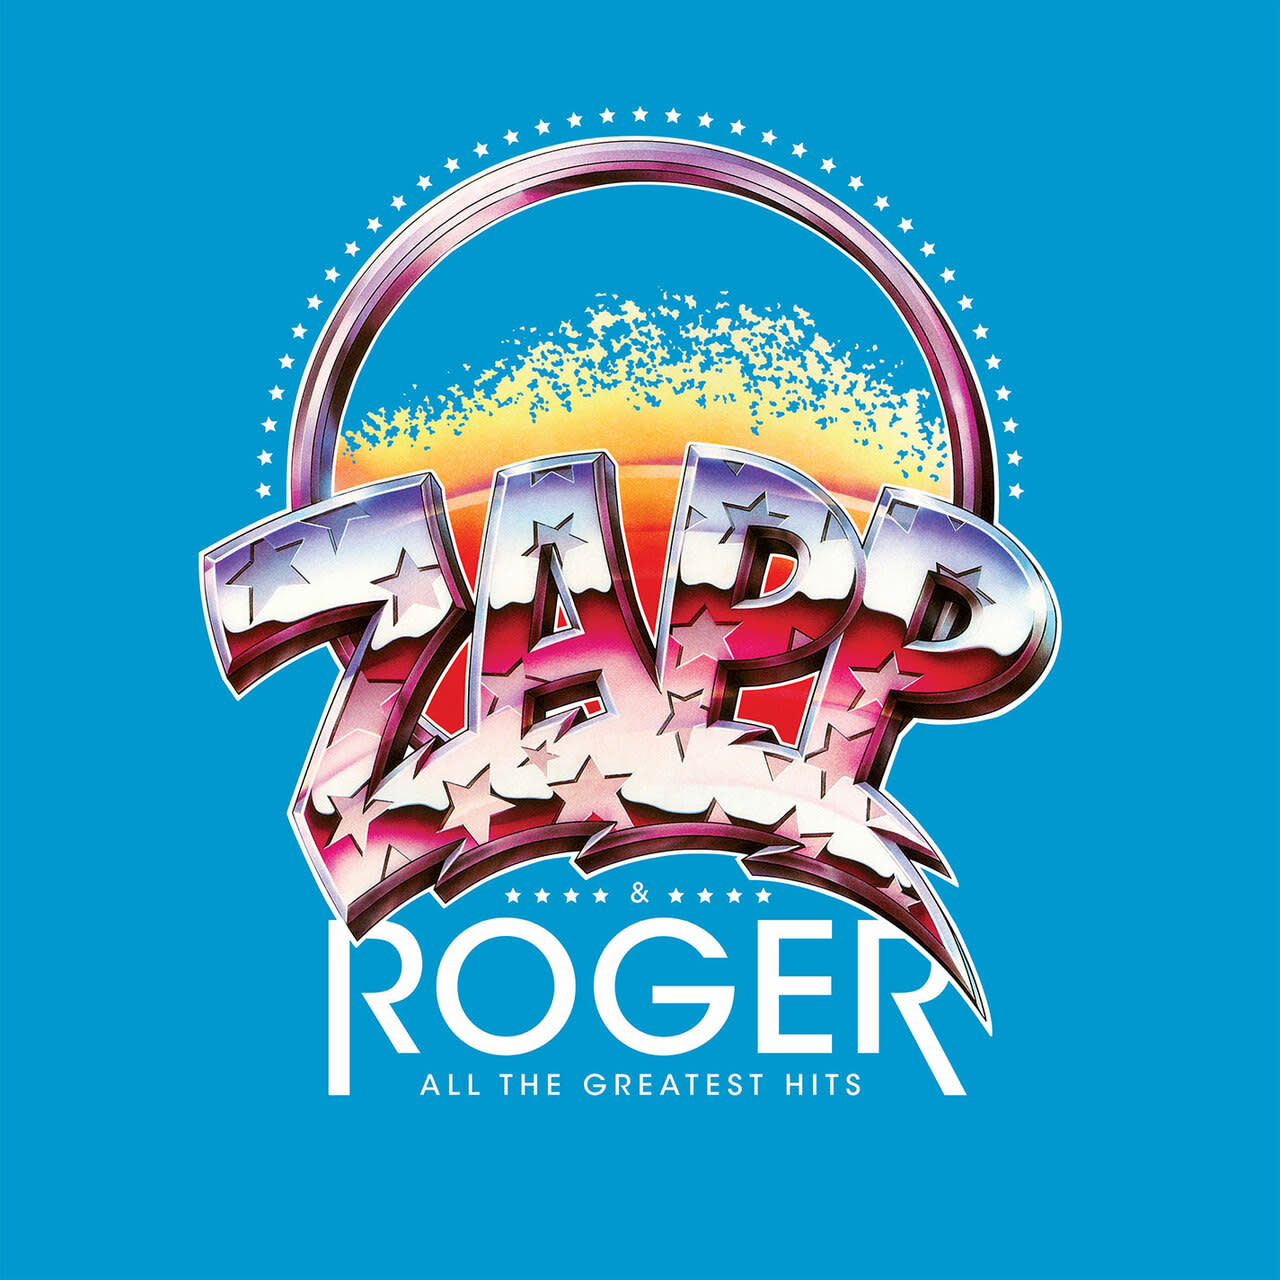 a list of all of zapp and roger songs